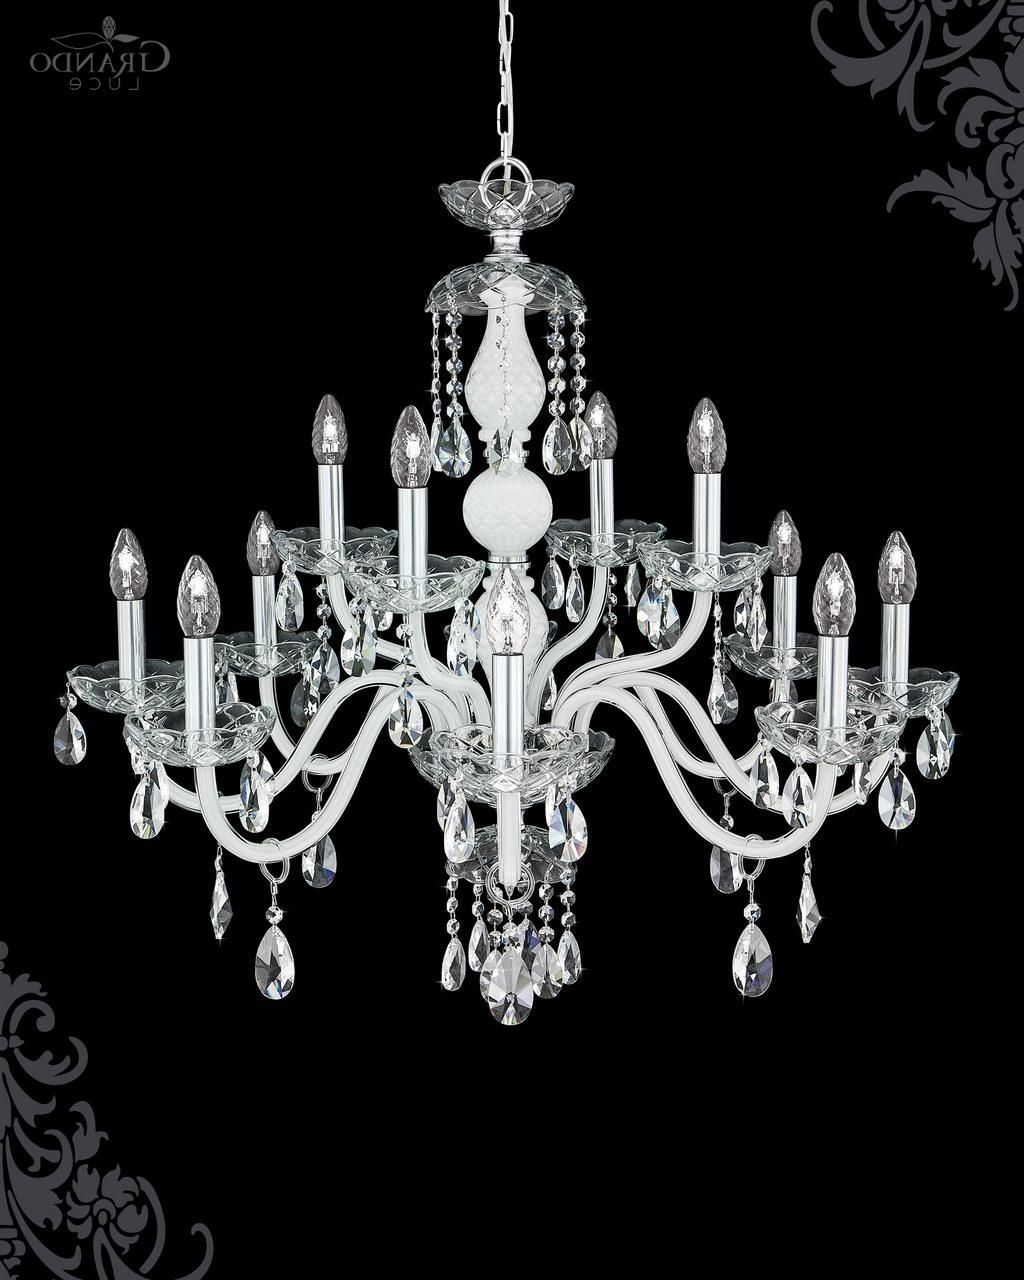 White Chandeliers Within Most Current 104/ch 8+4 Chrome White Crystal Chandelier – Grandoluce (View 10 of 20)